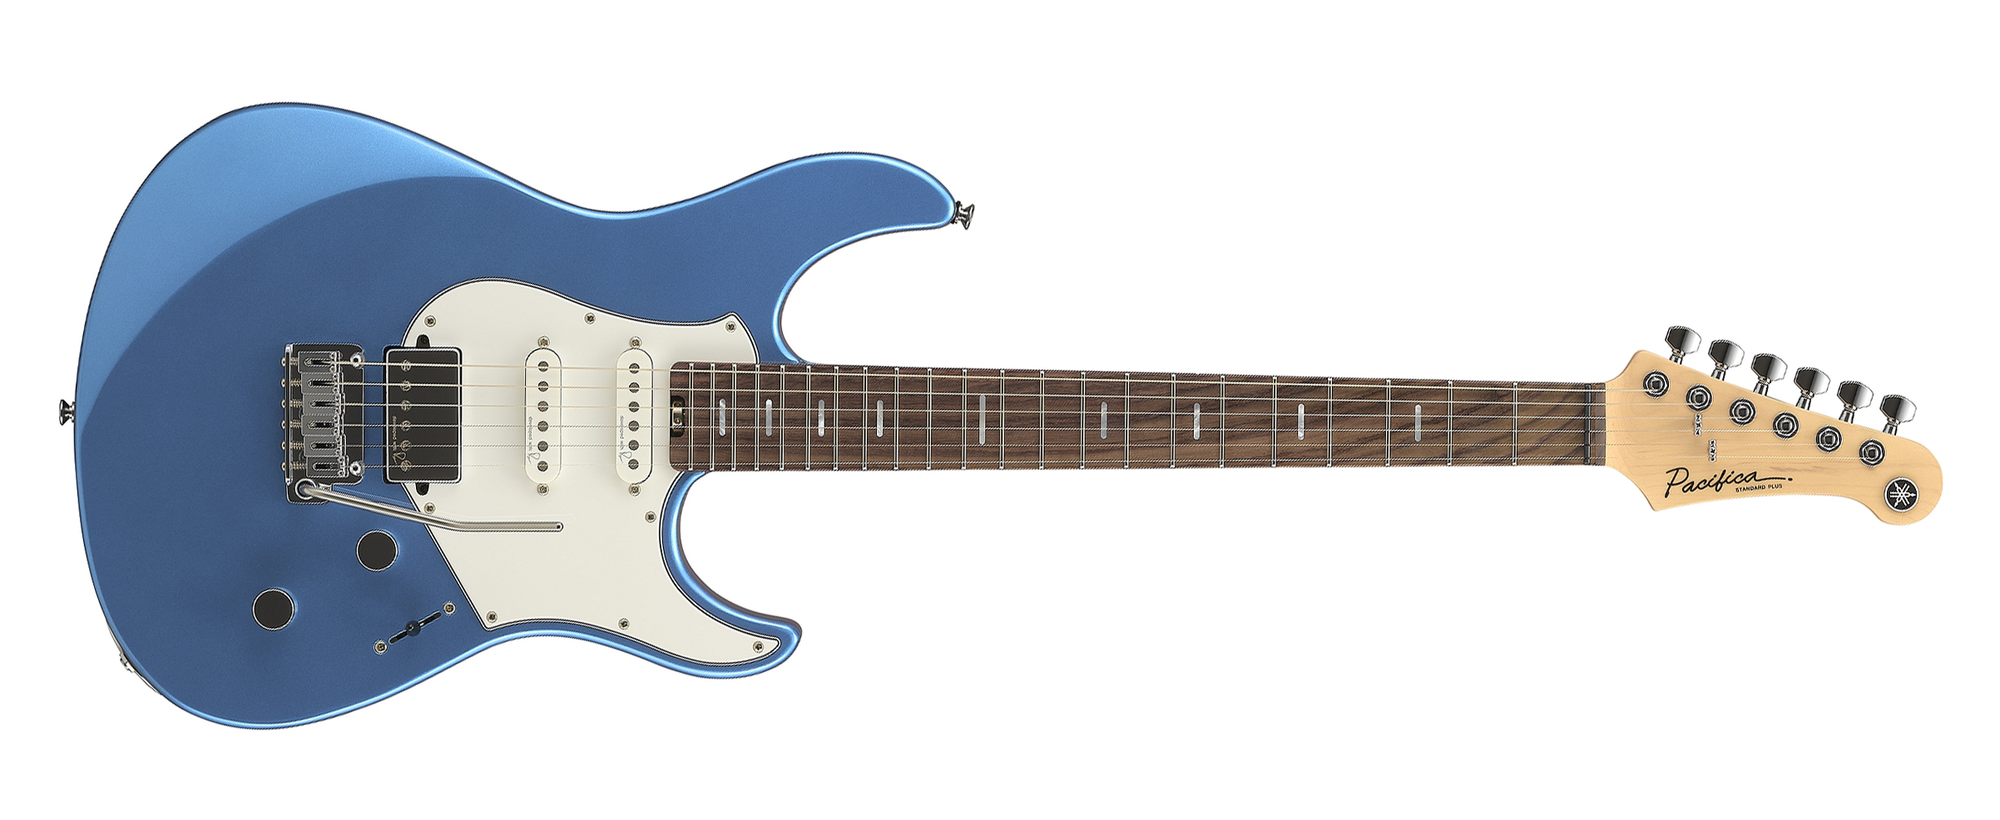 Yamaha PACS+12 SB 6-String RH Pacifica Standard Plus Solidbody Electric Guitar w/ Rosewood Fingerboard – Sparkling Blue